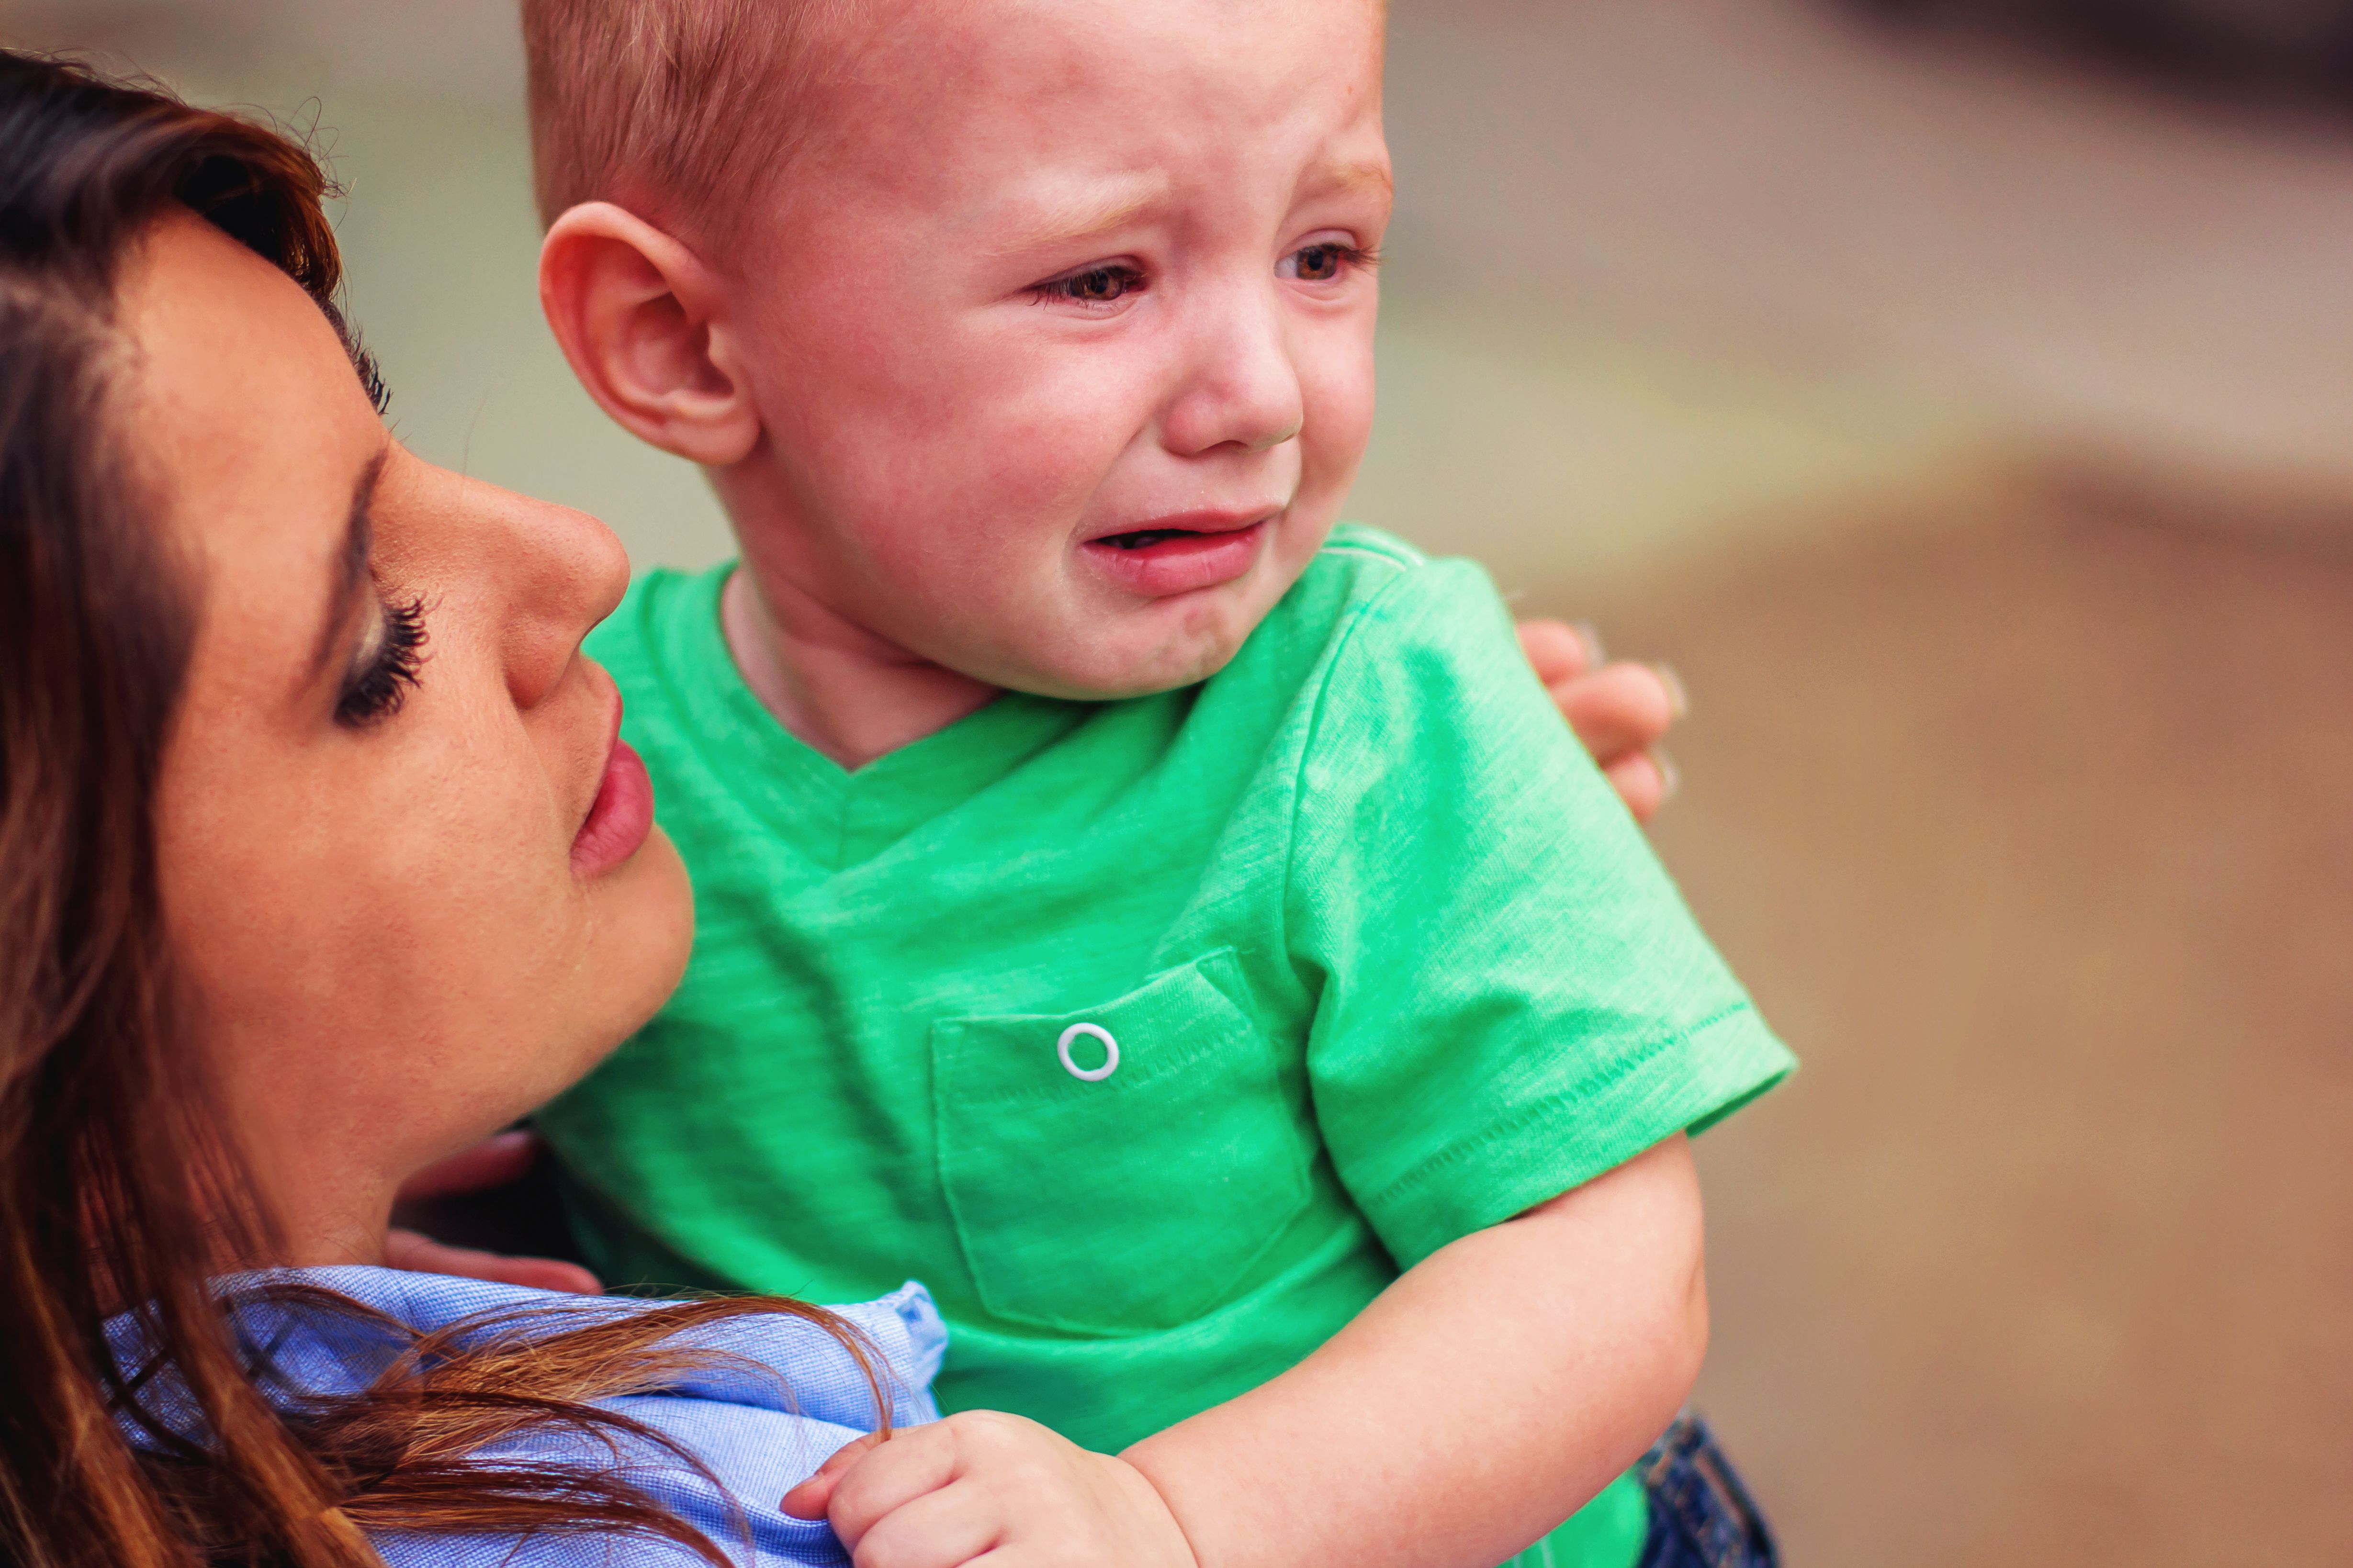 A woman holding a crying baby. │ Source: Shutterstock